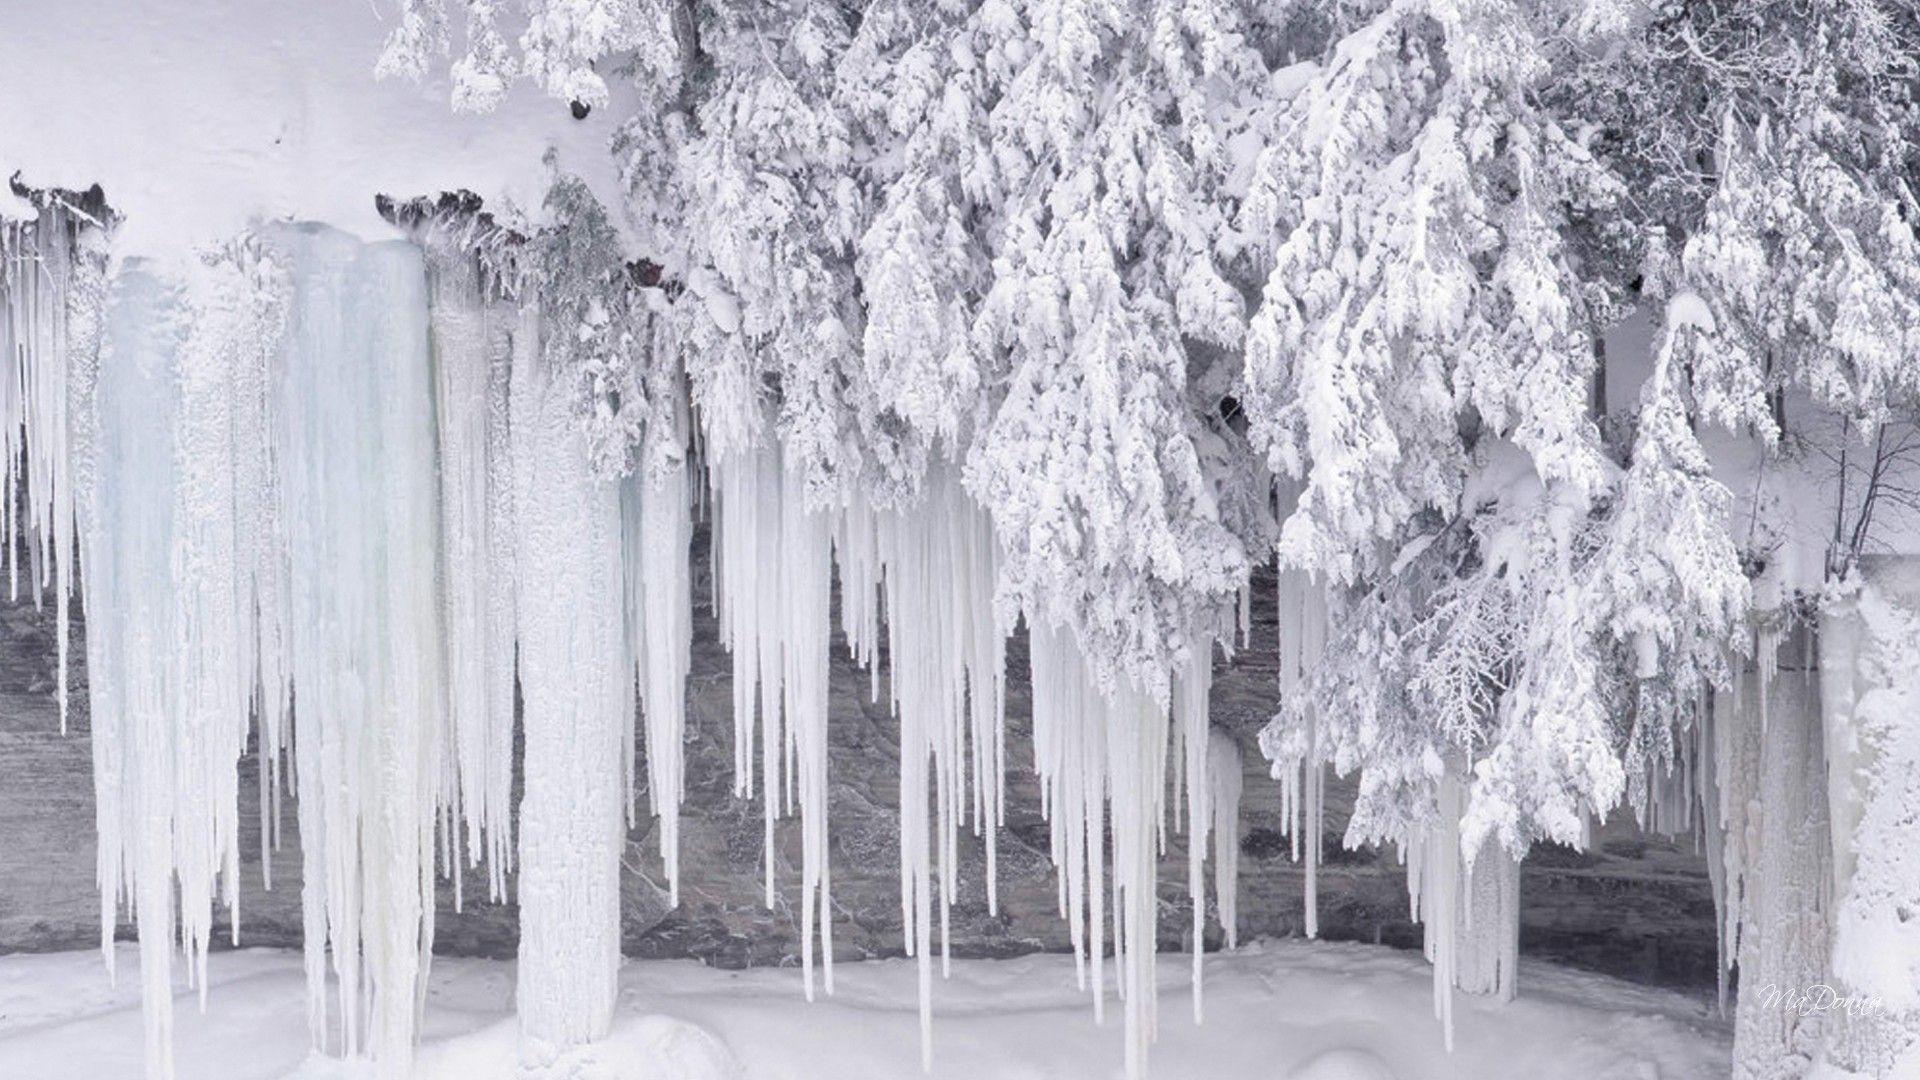 Winter: Cold Ice Snow Trees Icicles Waterfall Gets Freeze Winter